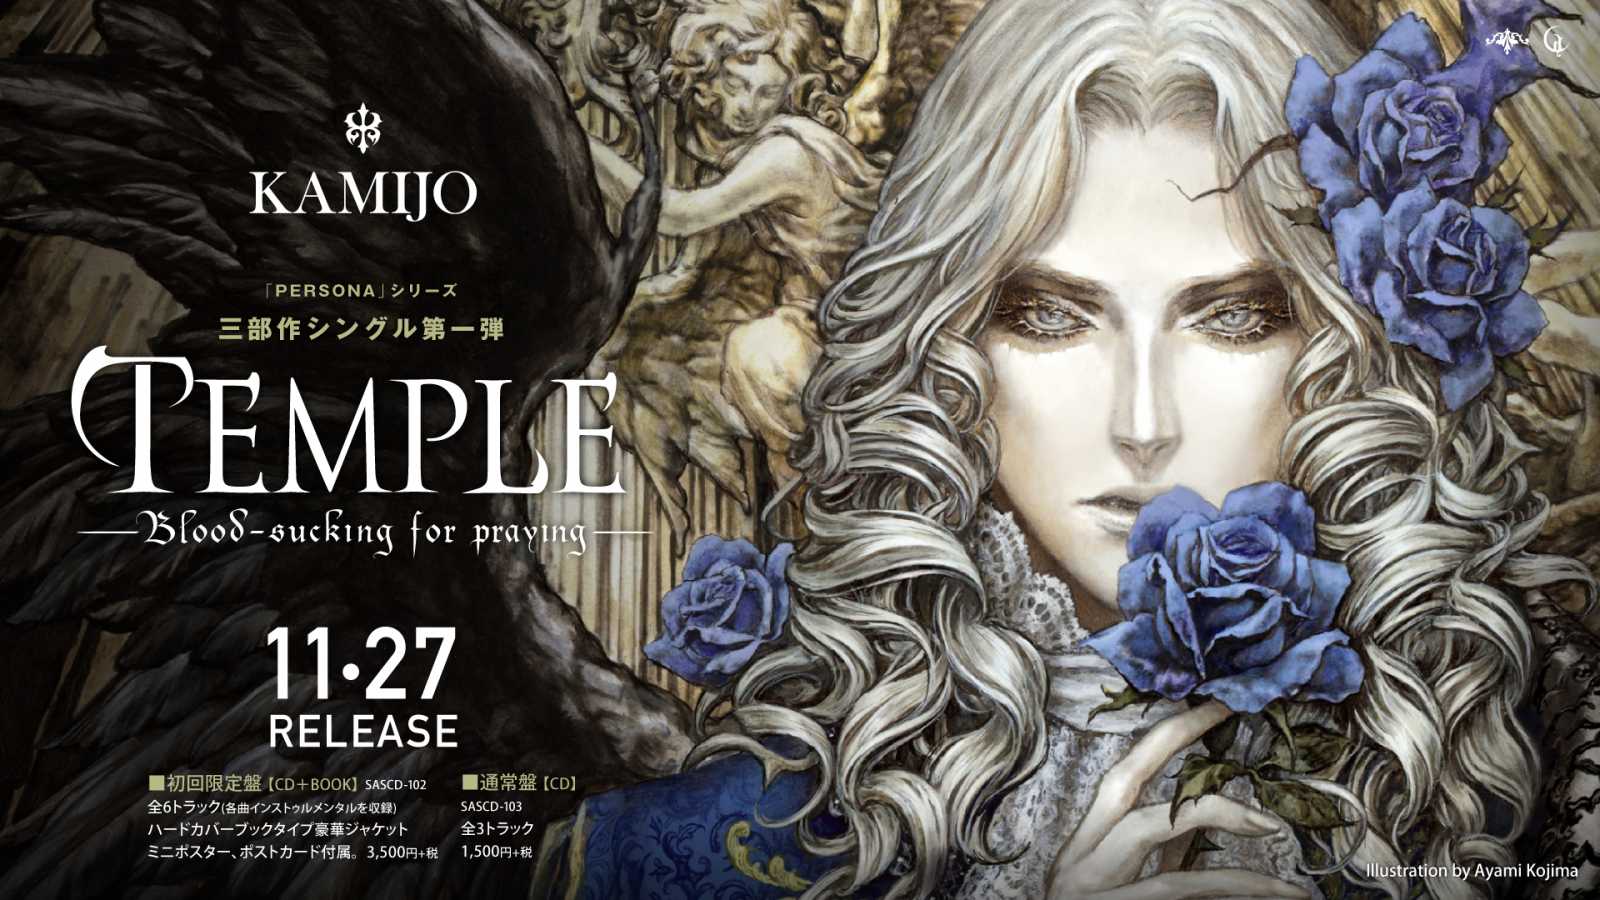 New Single from KAMIJO © CHATEAU AGENCY CO., Ltd. All rights reserved.